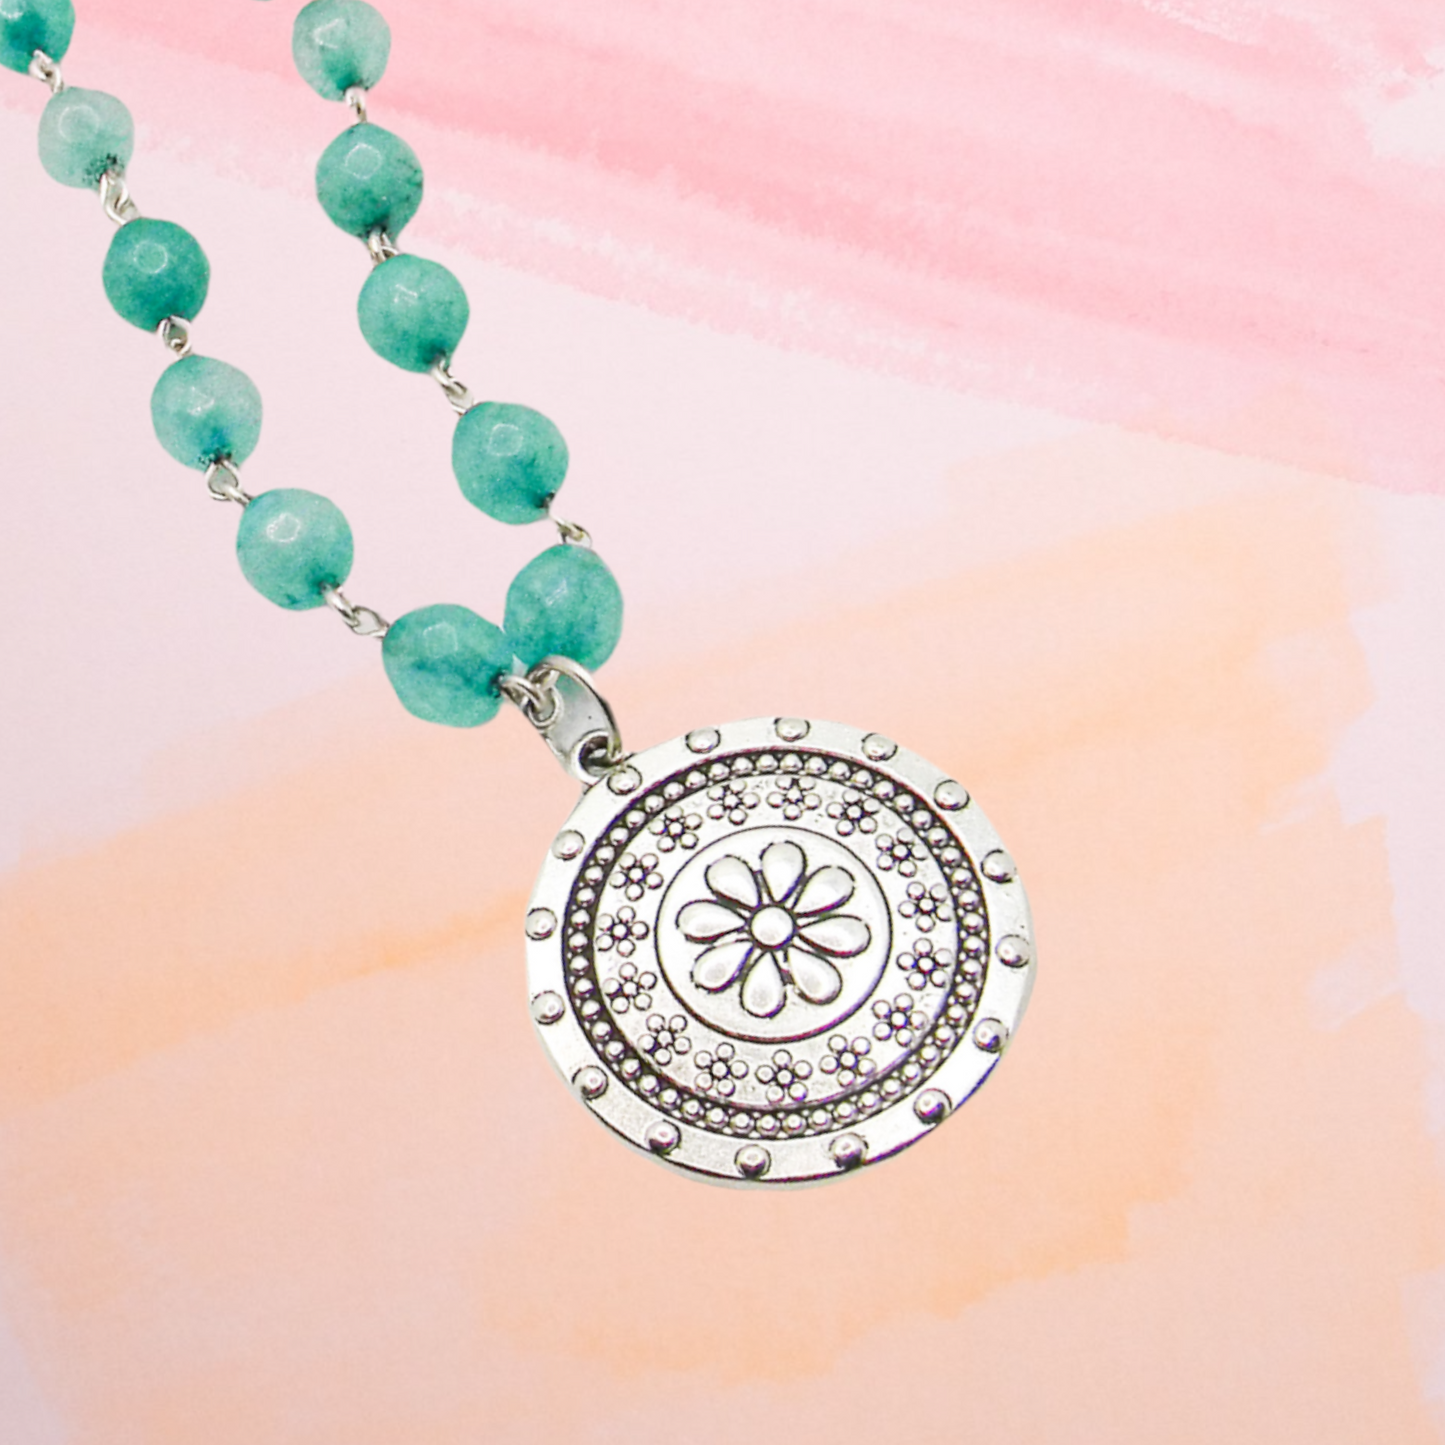 Teal Blossom Necklace with Flower Pendant